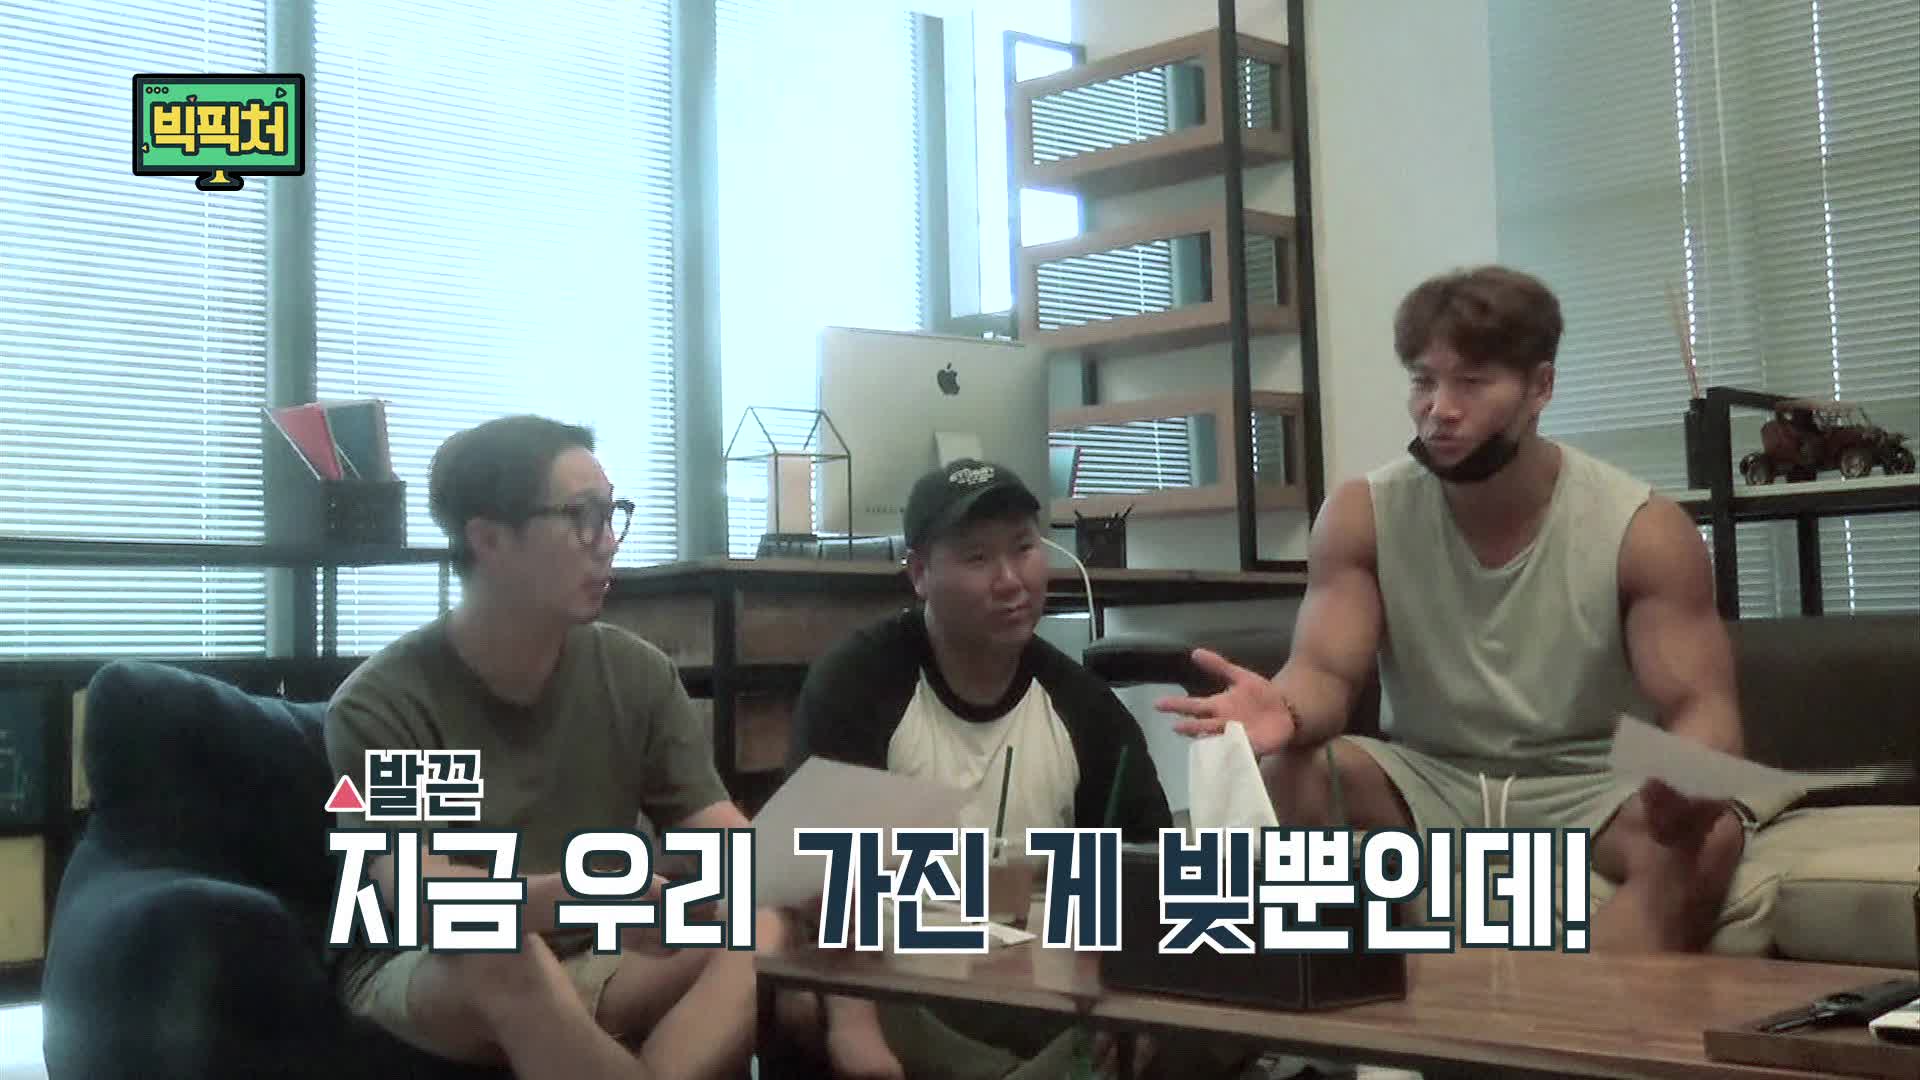 Big Picture ep03_무엇이든 메이드 합니다! (Whatever it is, Made will do it)